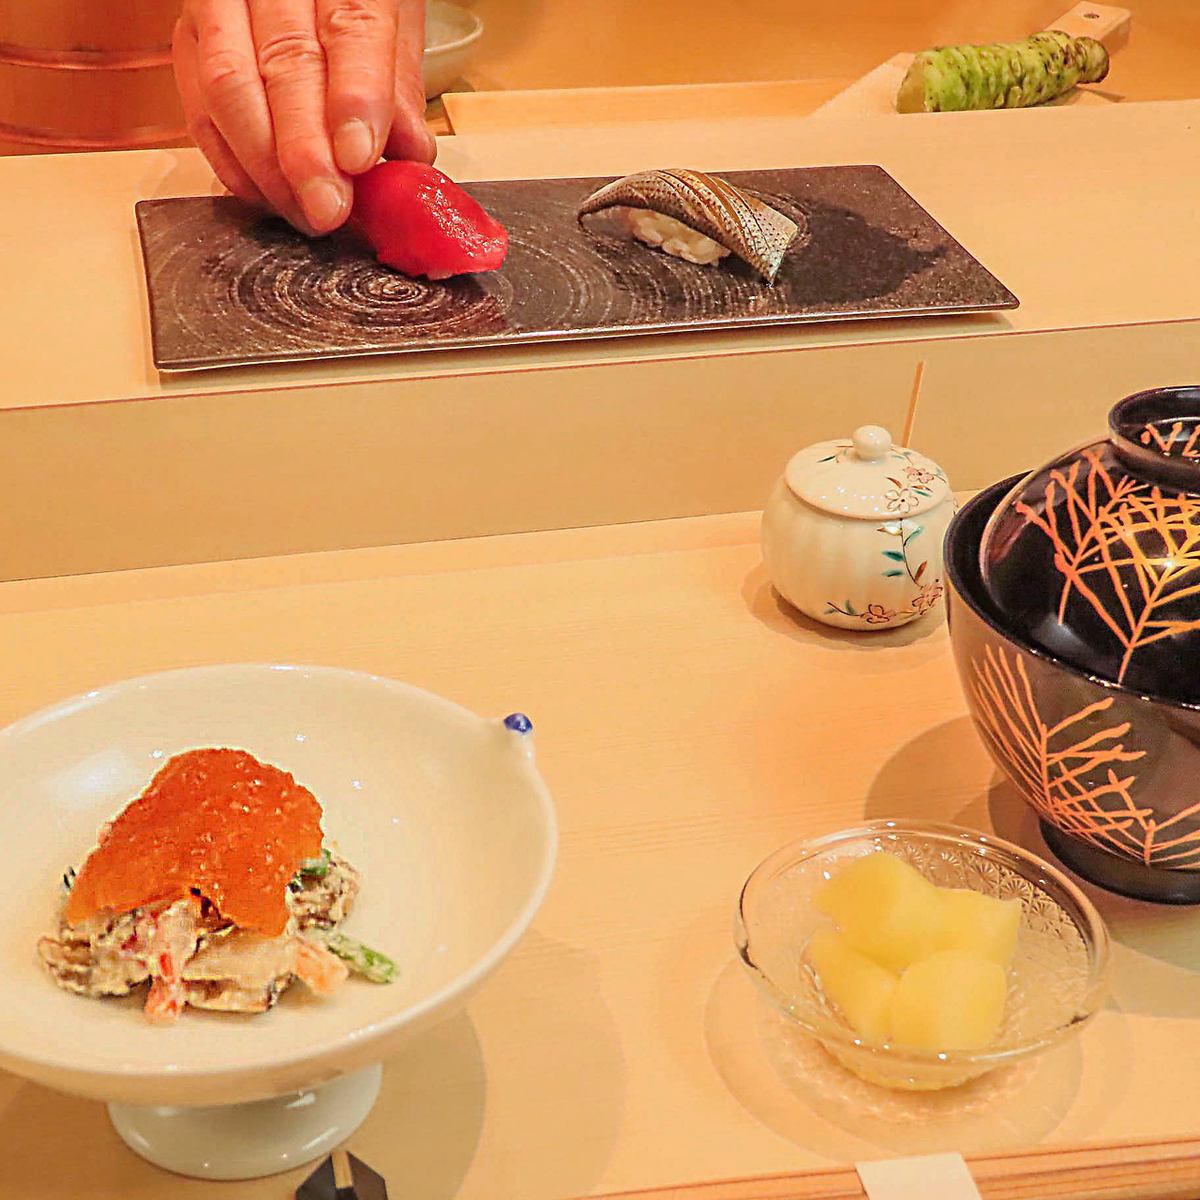 Enjoy sushi and kaiseki cuisine to your heart's content in a wood-based restaurant.